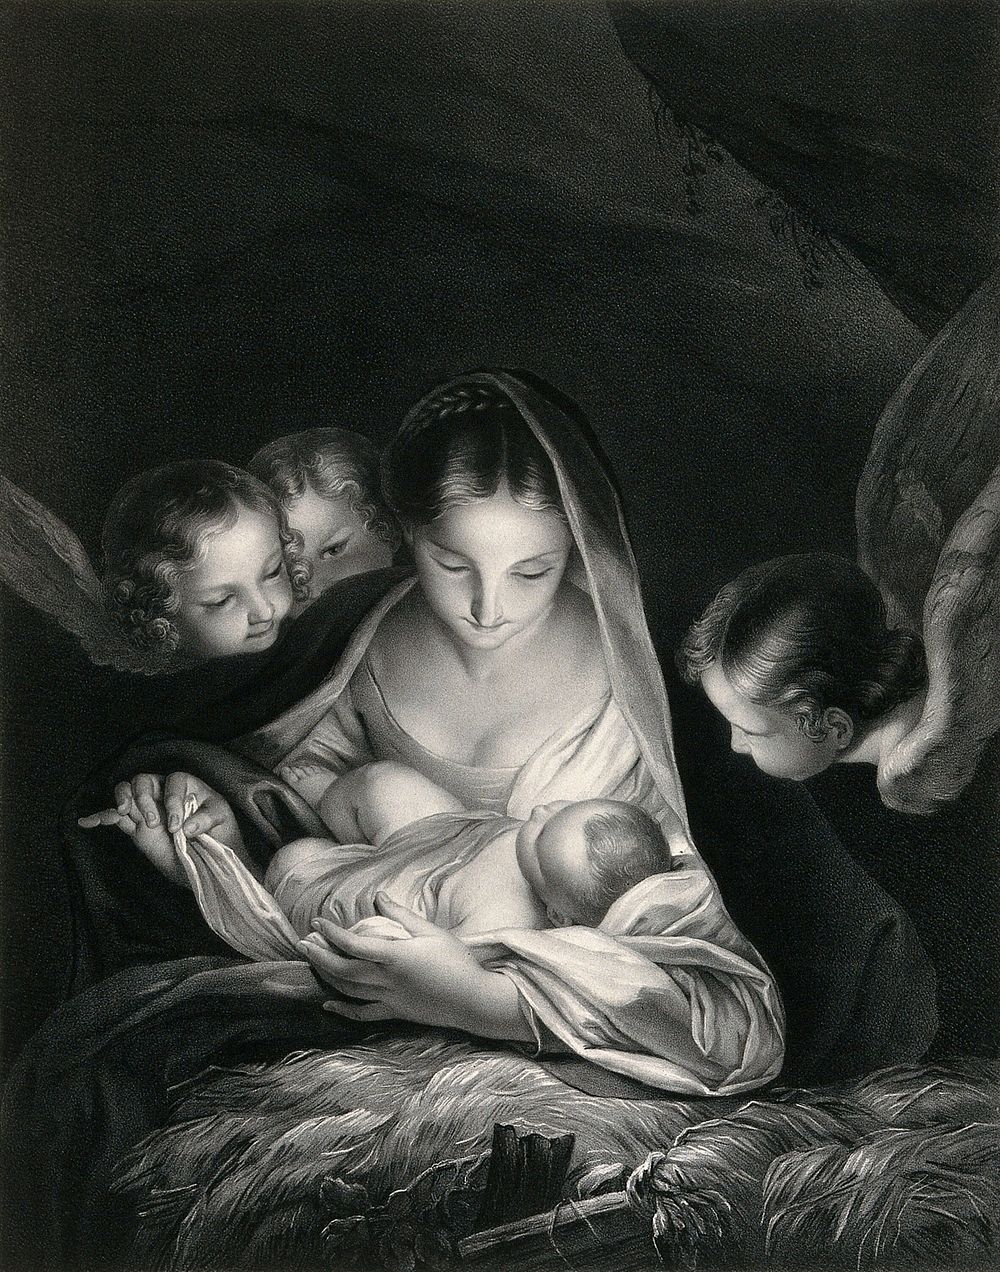 The nativity. Lithograph by H. Hanfstaengl after C. Maratta.